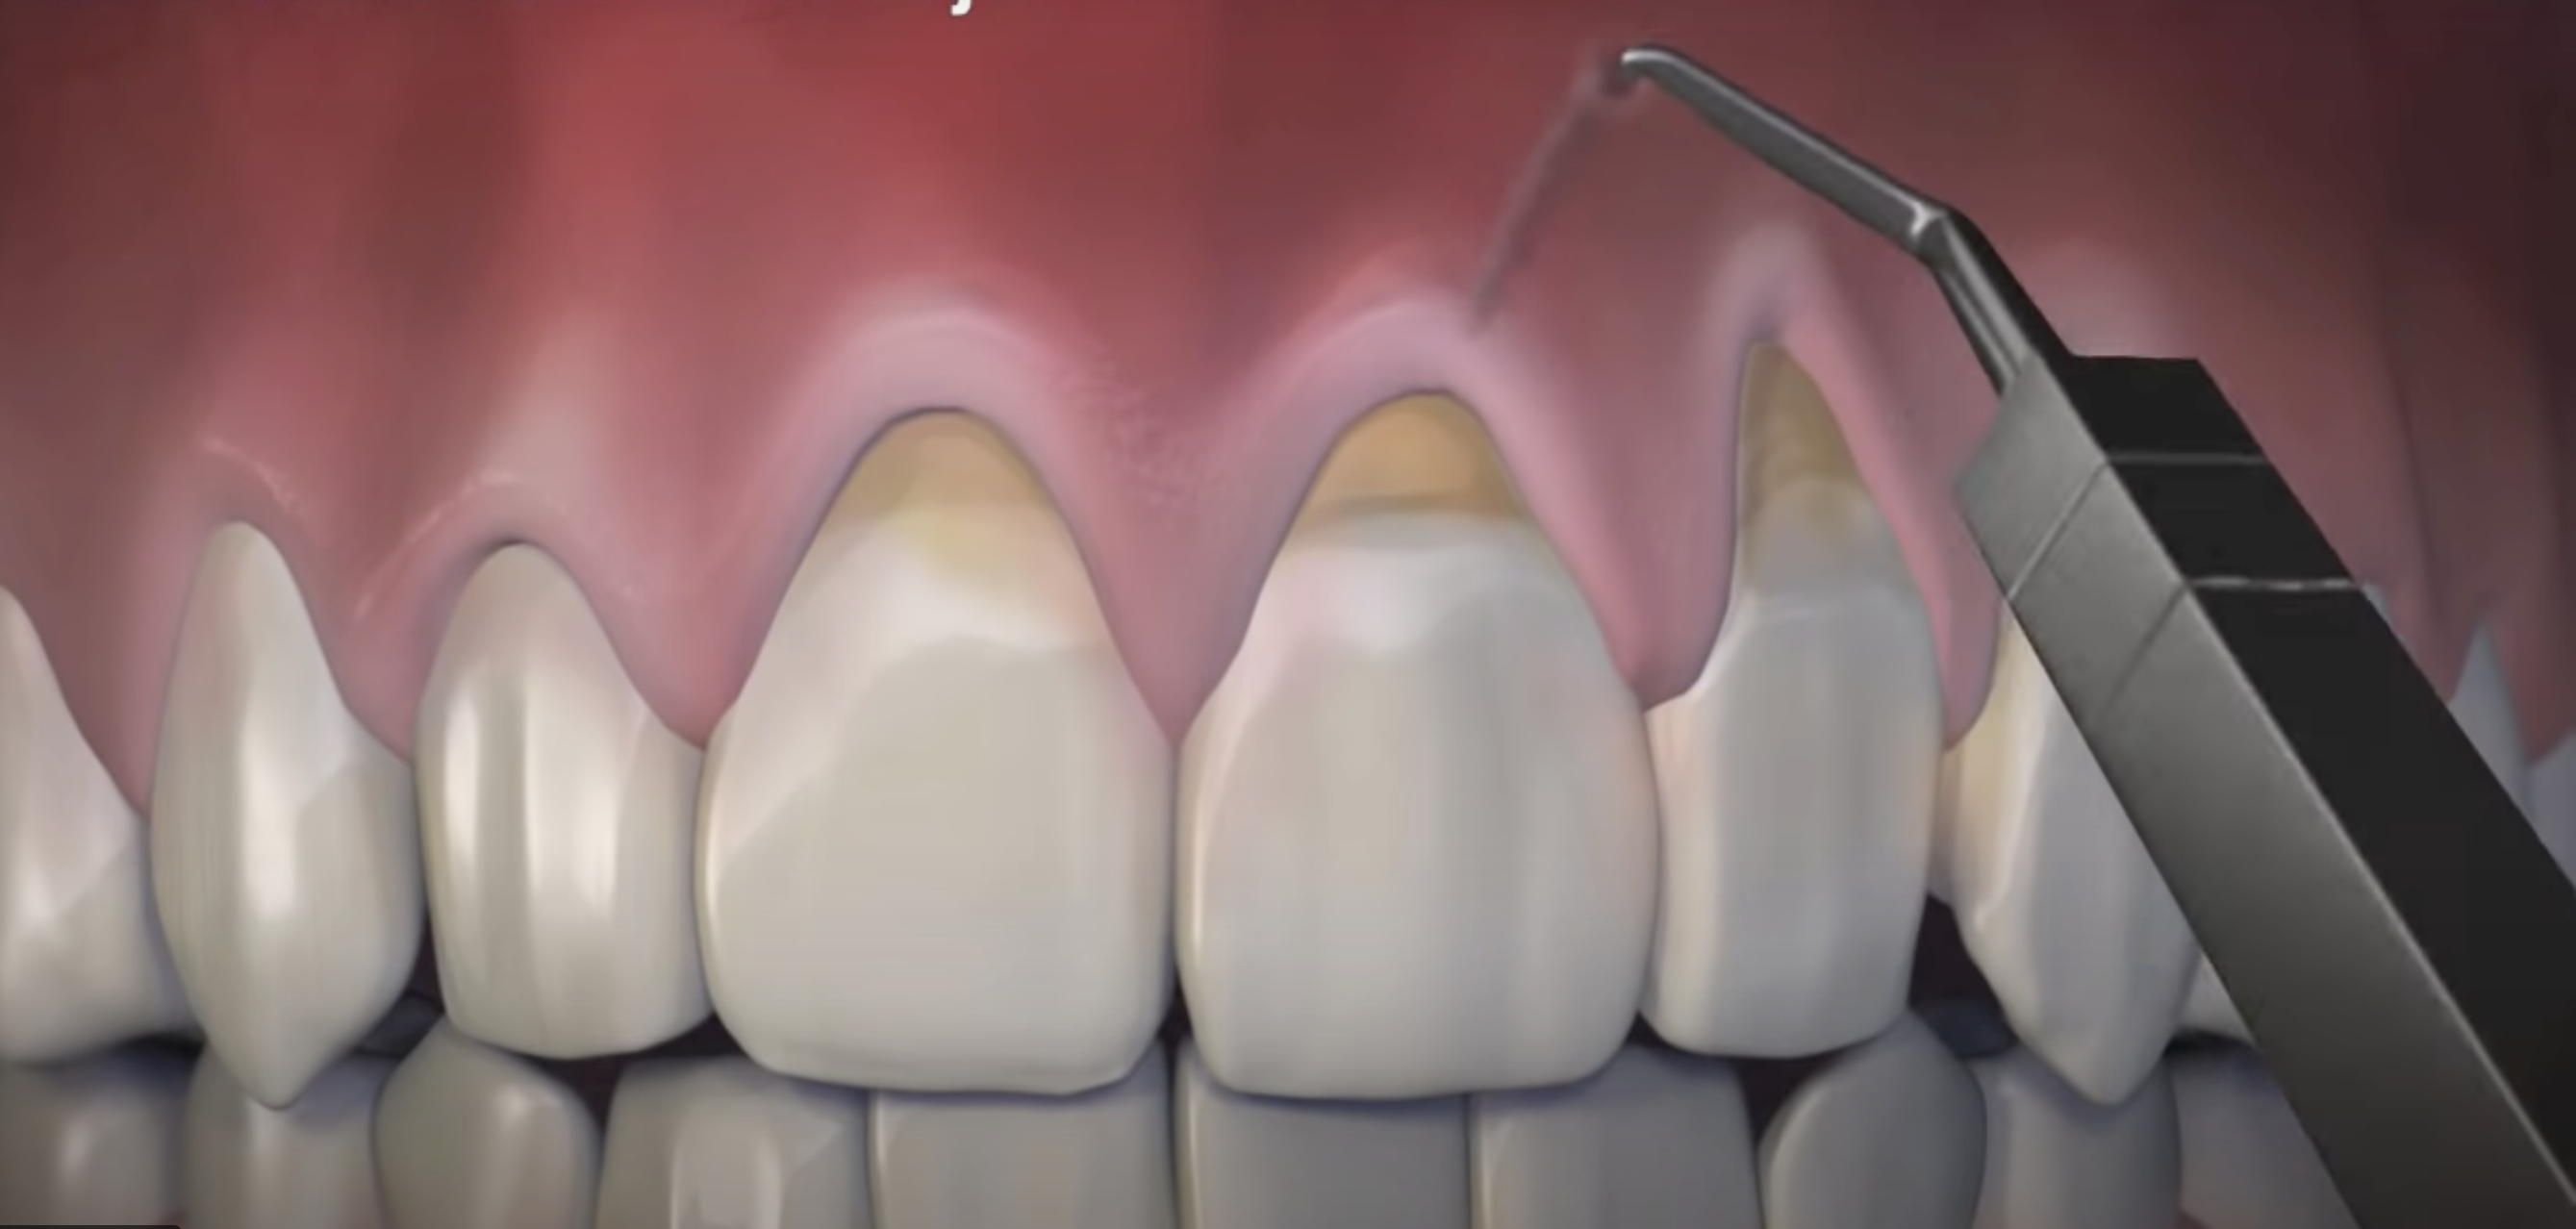 close up Illustration of upper front teeth with an instrument creating pinhole in gums